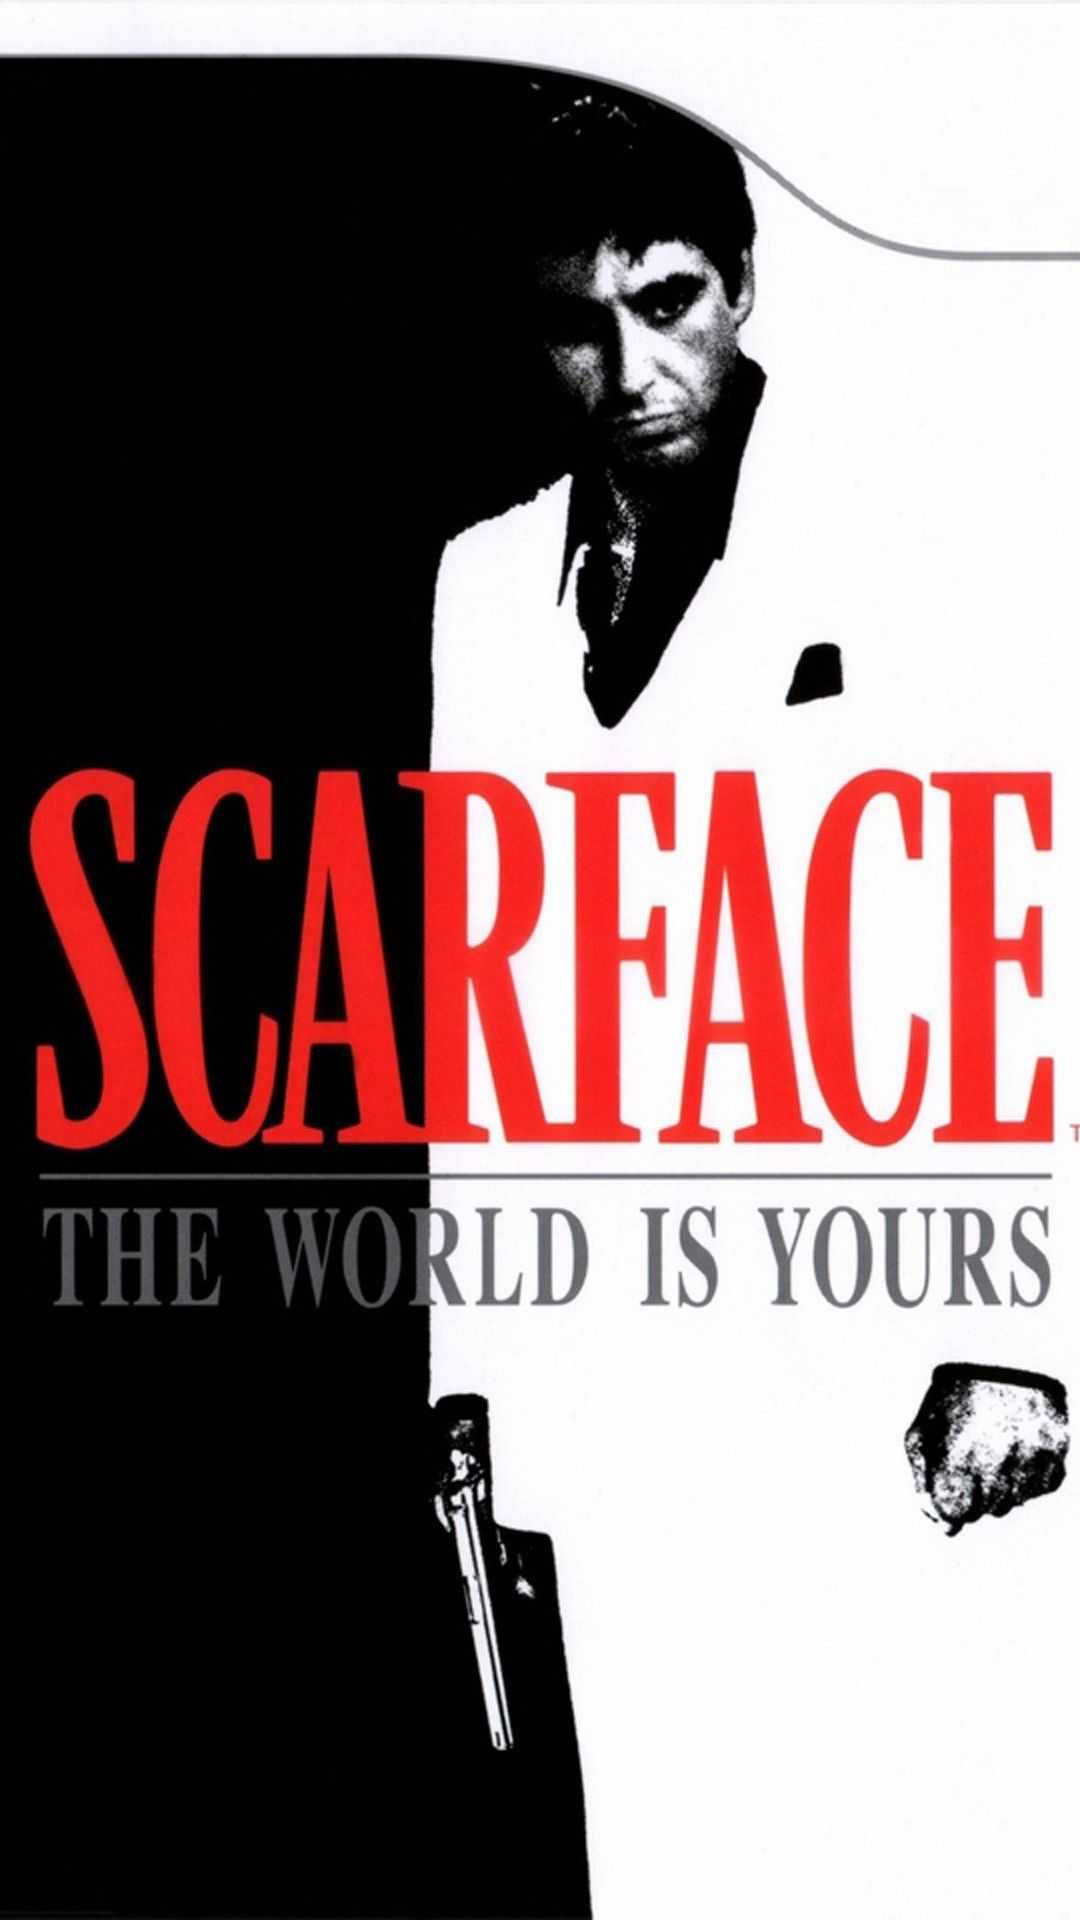 Scarface Wallpaper Discover more Al Pacino, Film, Scarface, Tony Montana wallpaper. /scarface. Scarface movie, Scarface, Film posters vintage